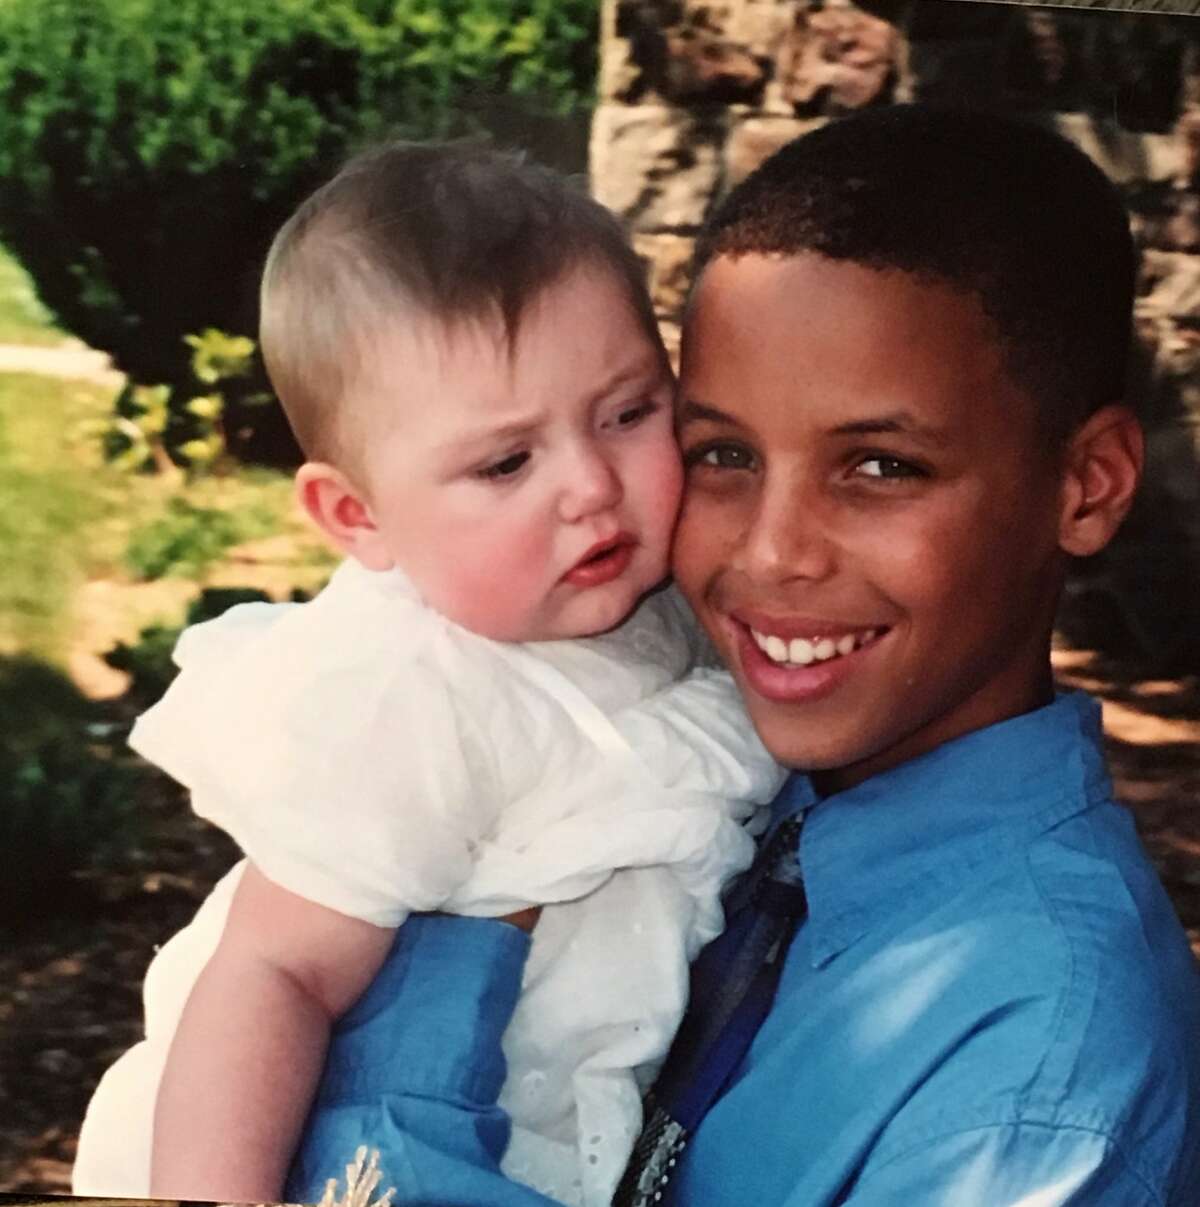 Stephen Curry poses with Cameron Brink at Brink's baptism in Lake George, NY.